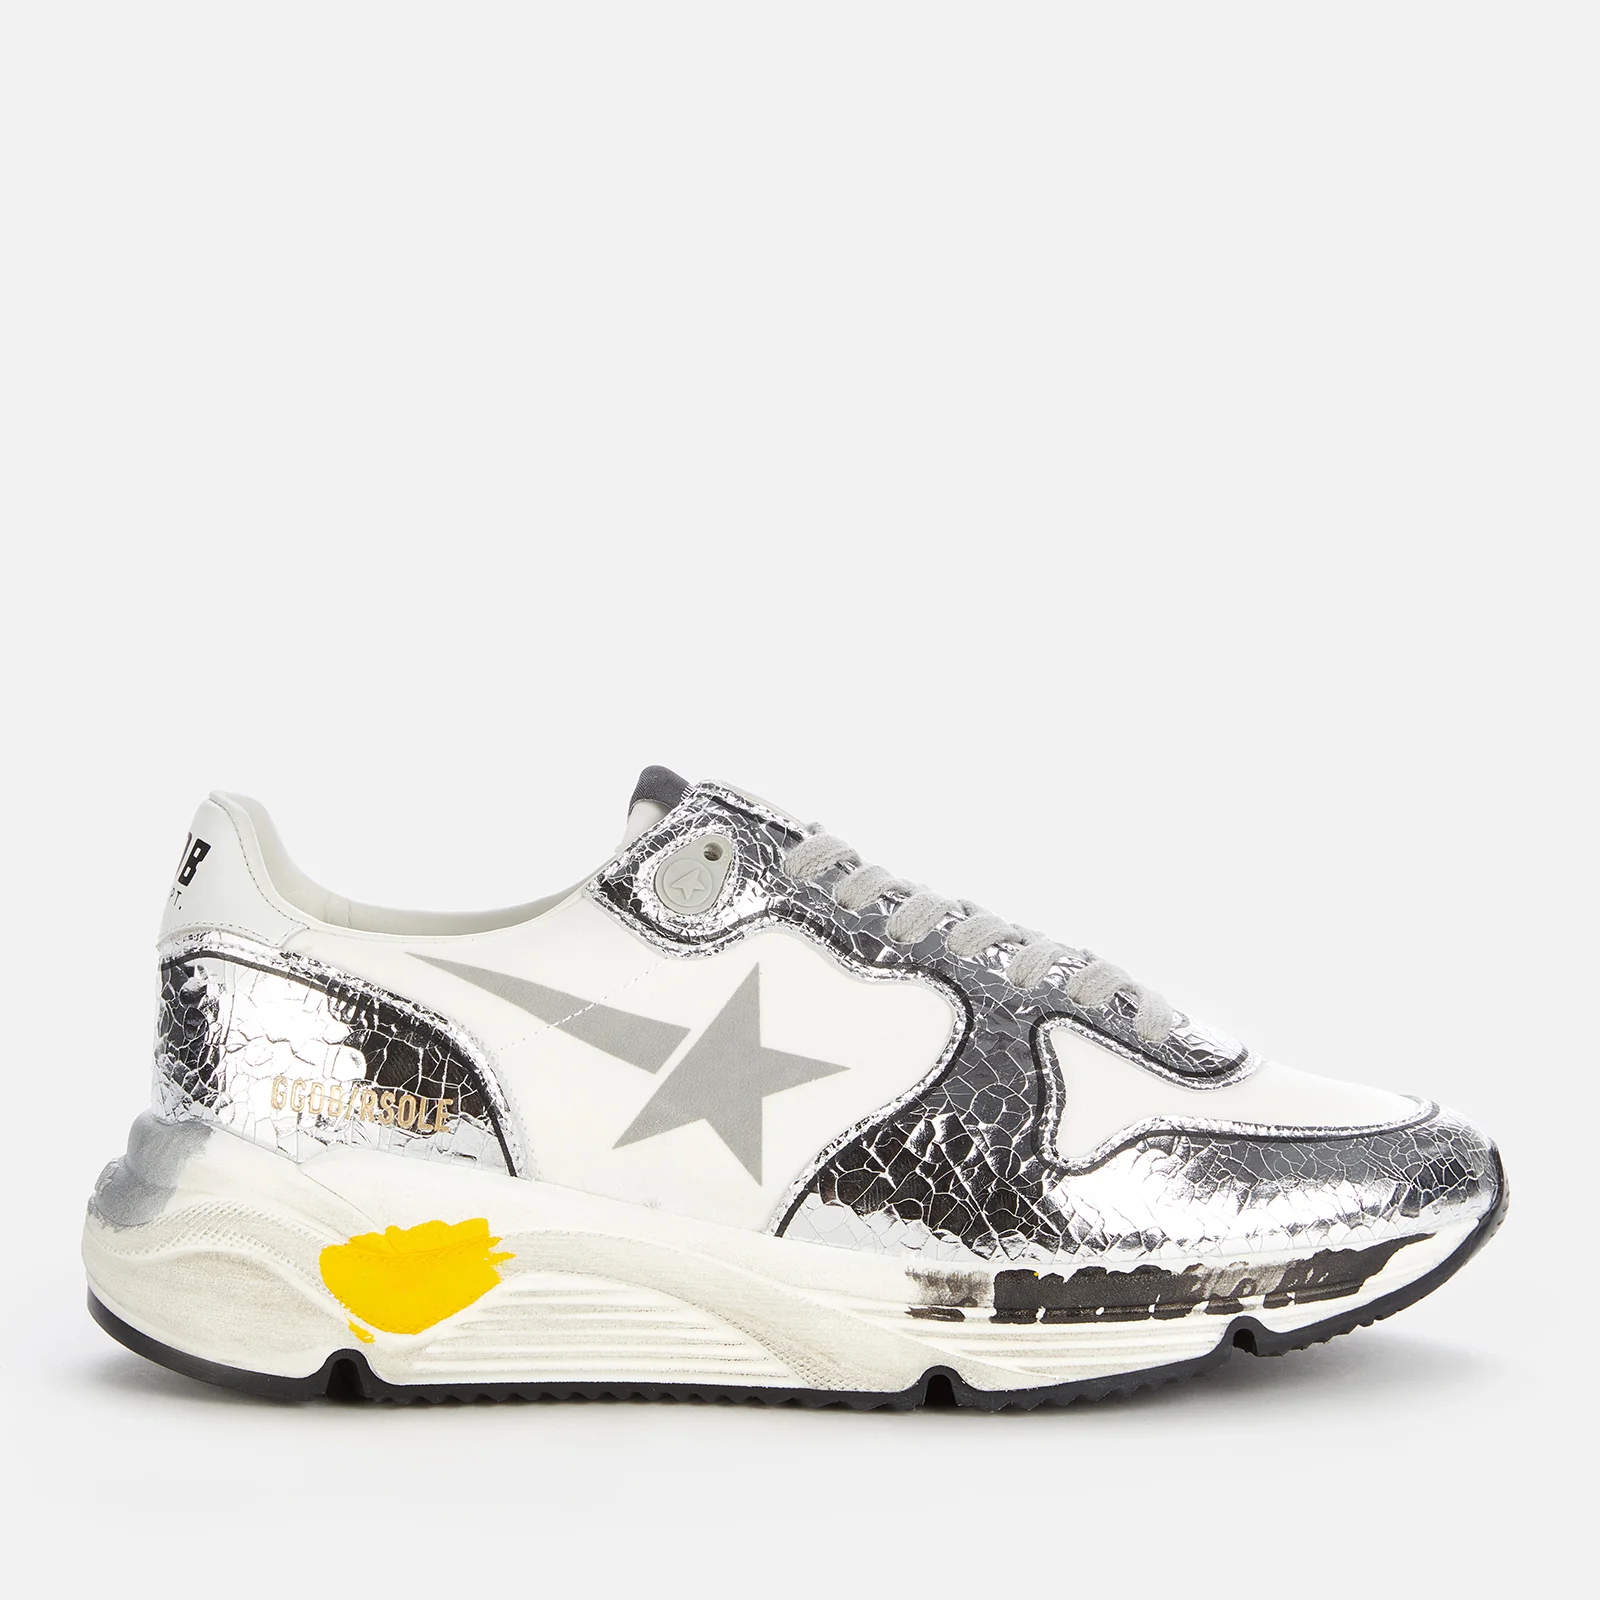 Golden Goose Women's Running Style Trainers - White/Silver Image 1